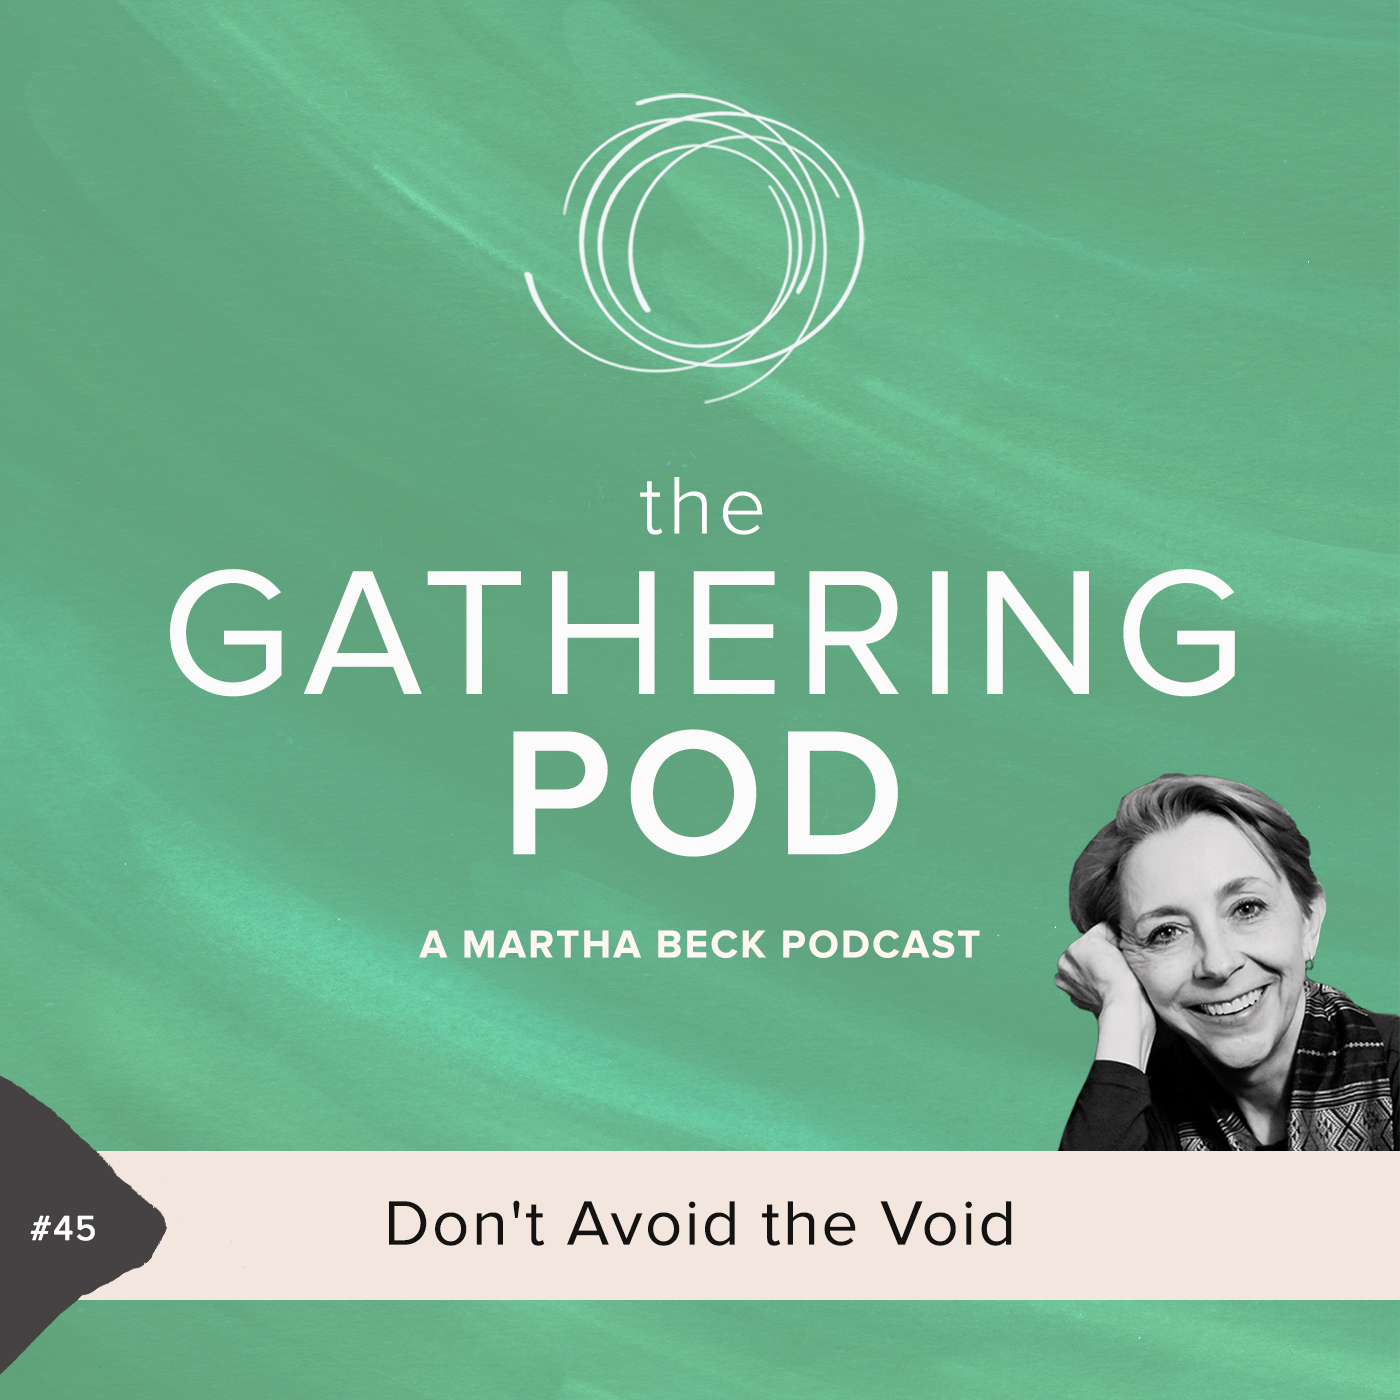 Image for The Gathering Pod A Martha Beck Podcast Episode #45 Don’t Avoid the Void